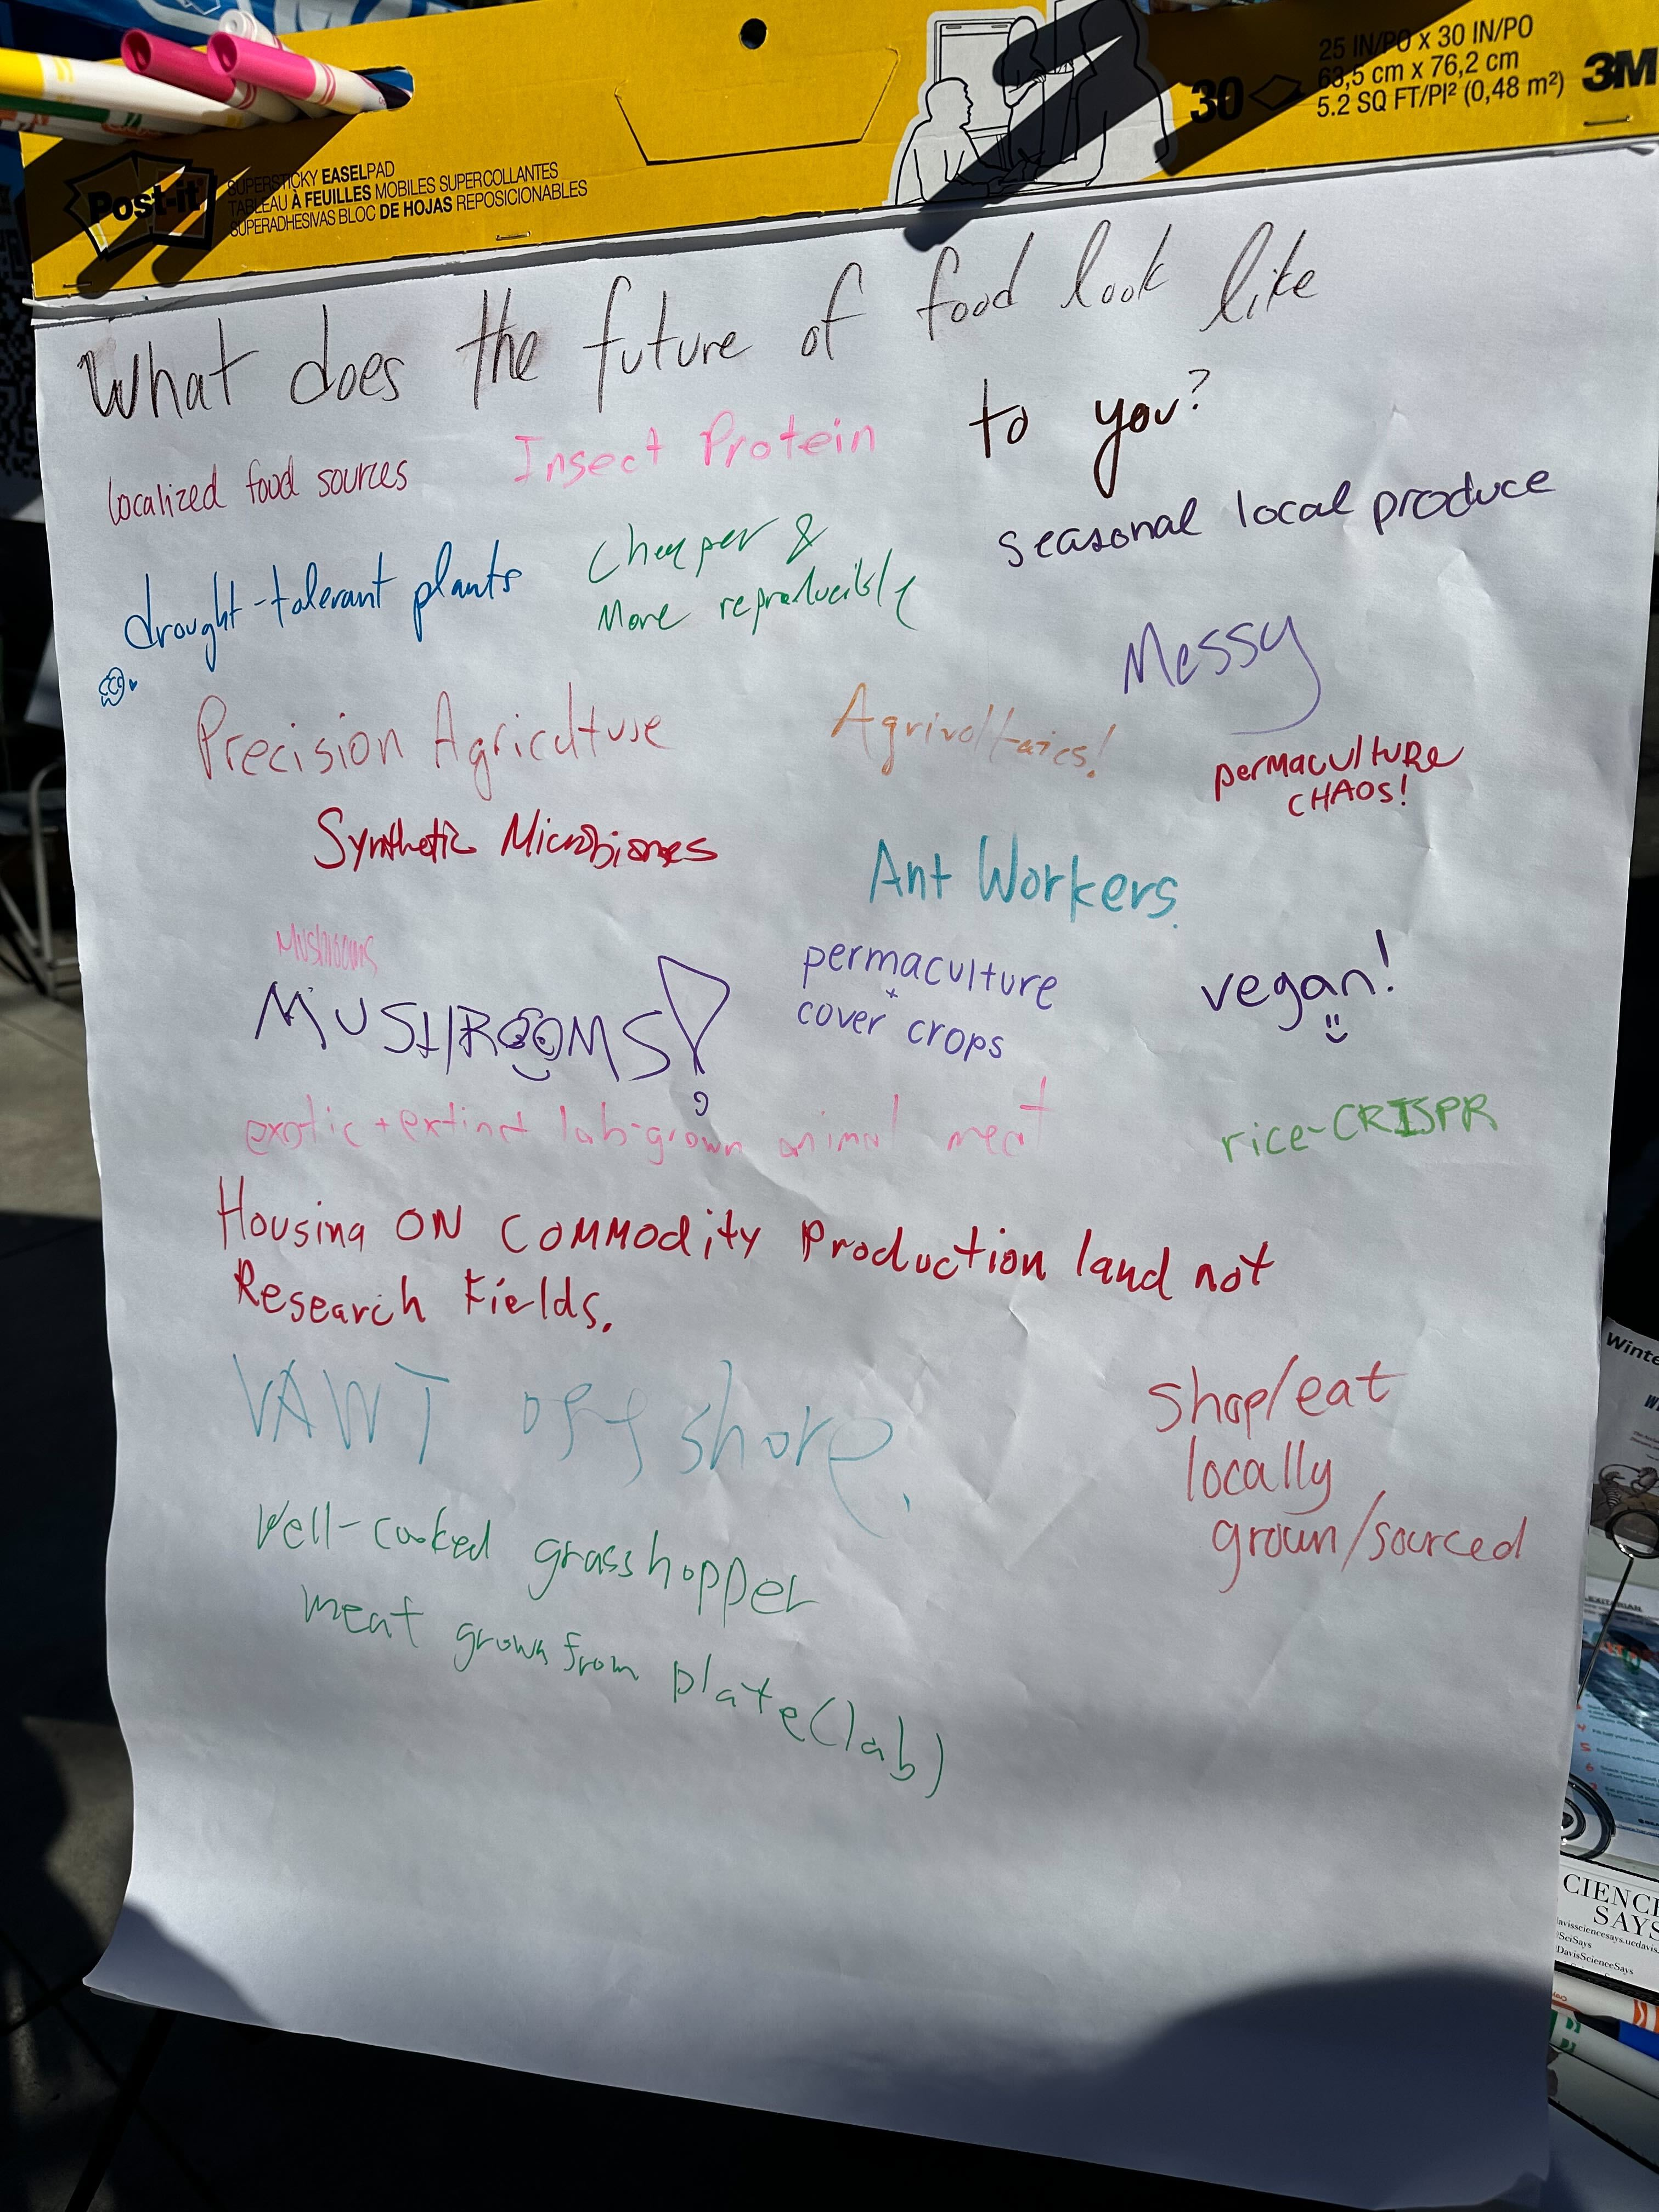 Free-write board depicting responses to the question "What does the future of food look like to you?"